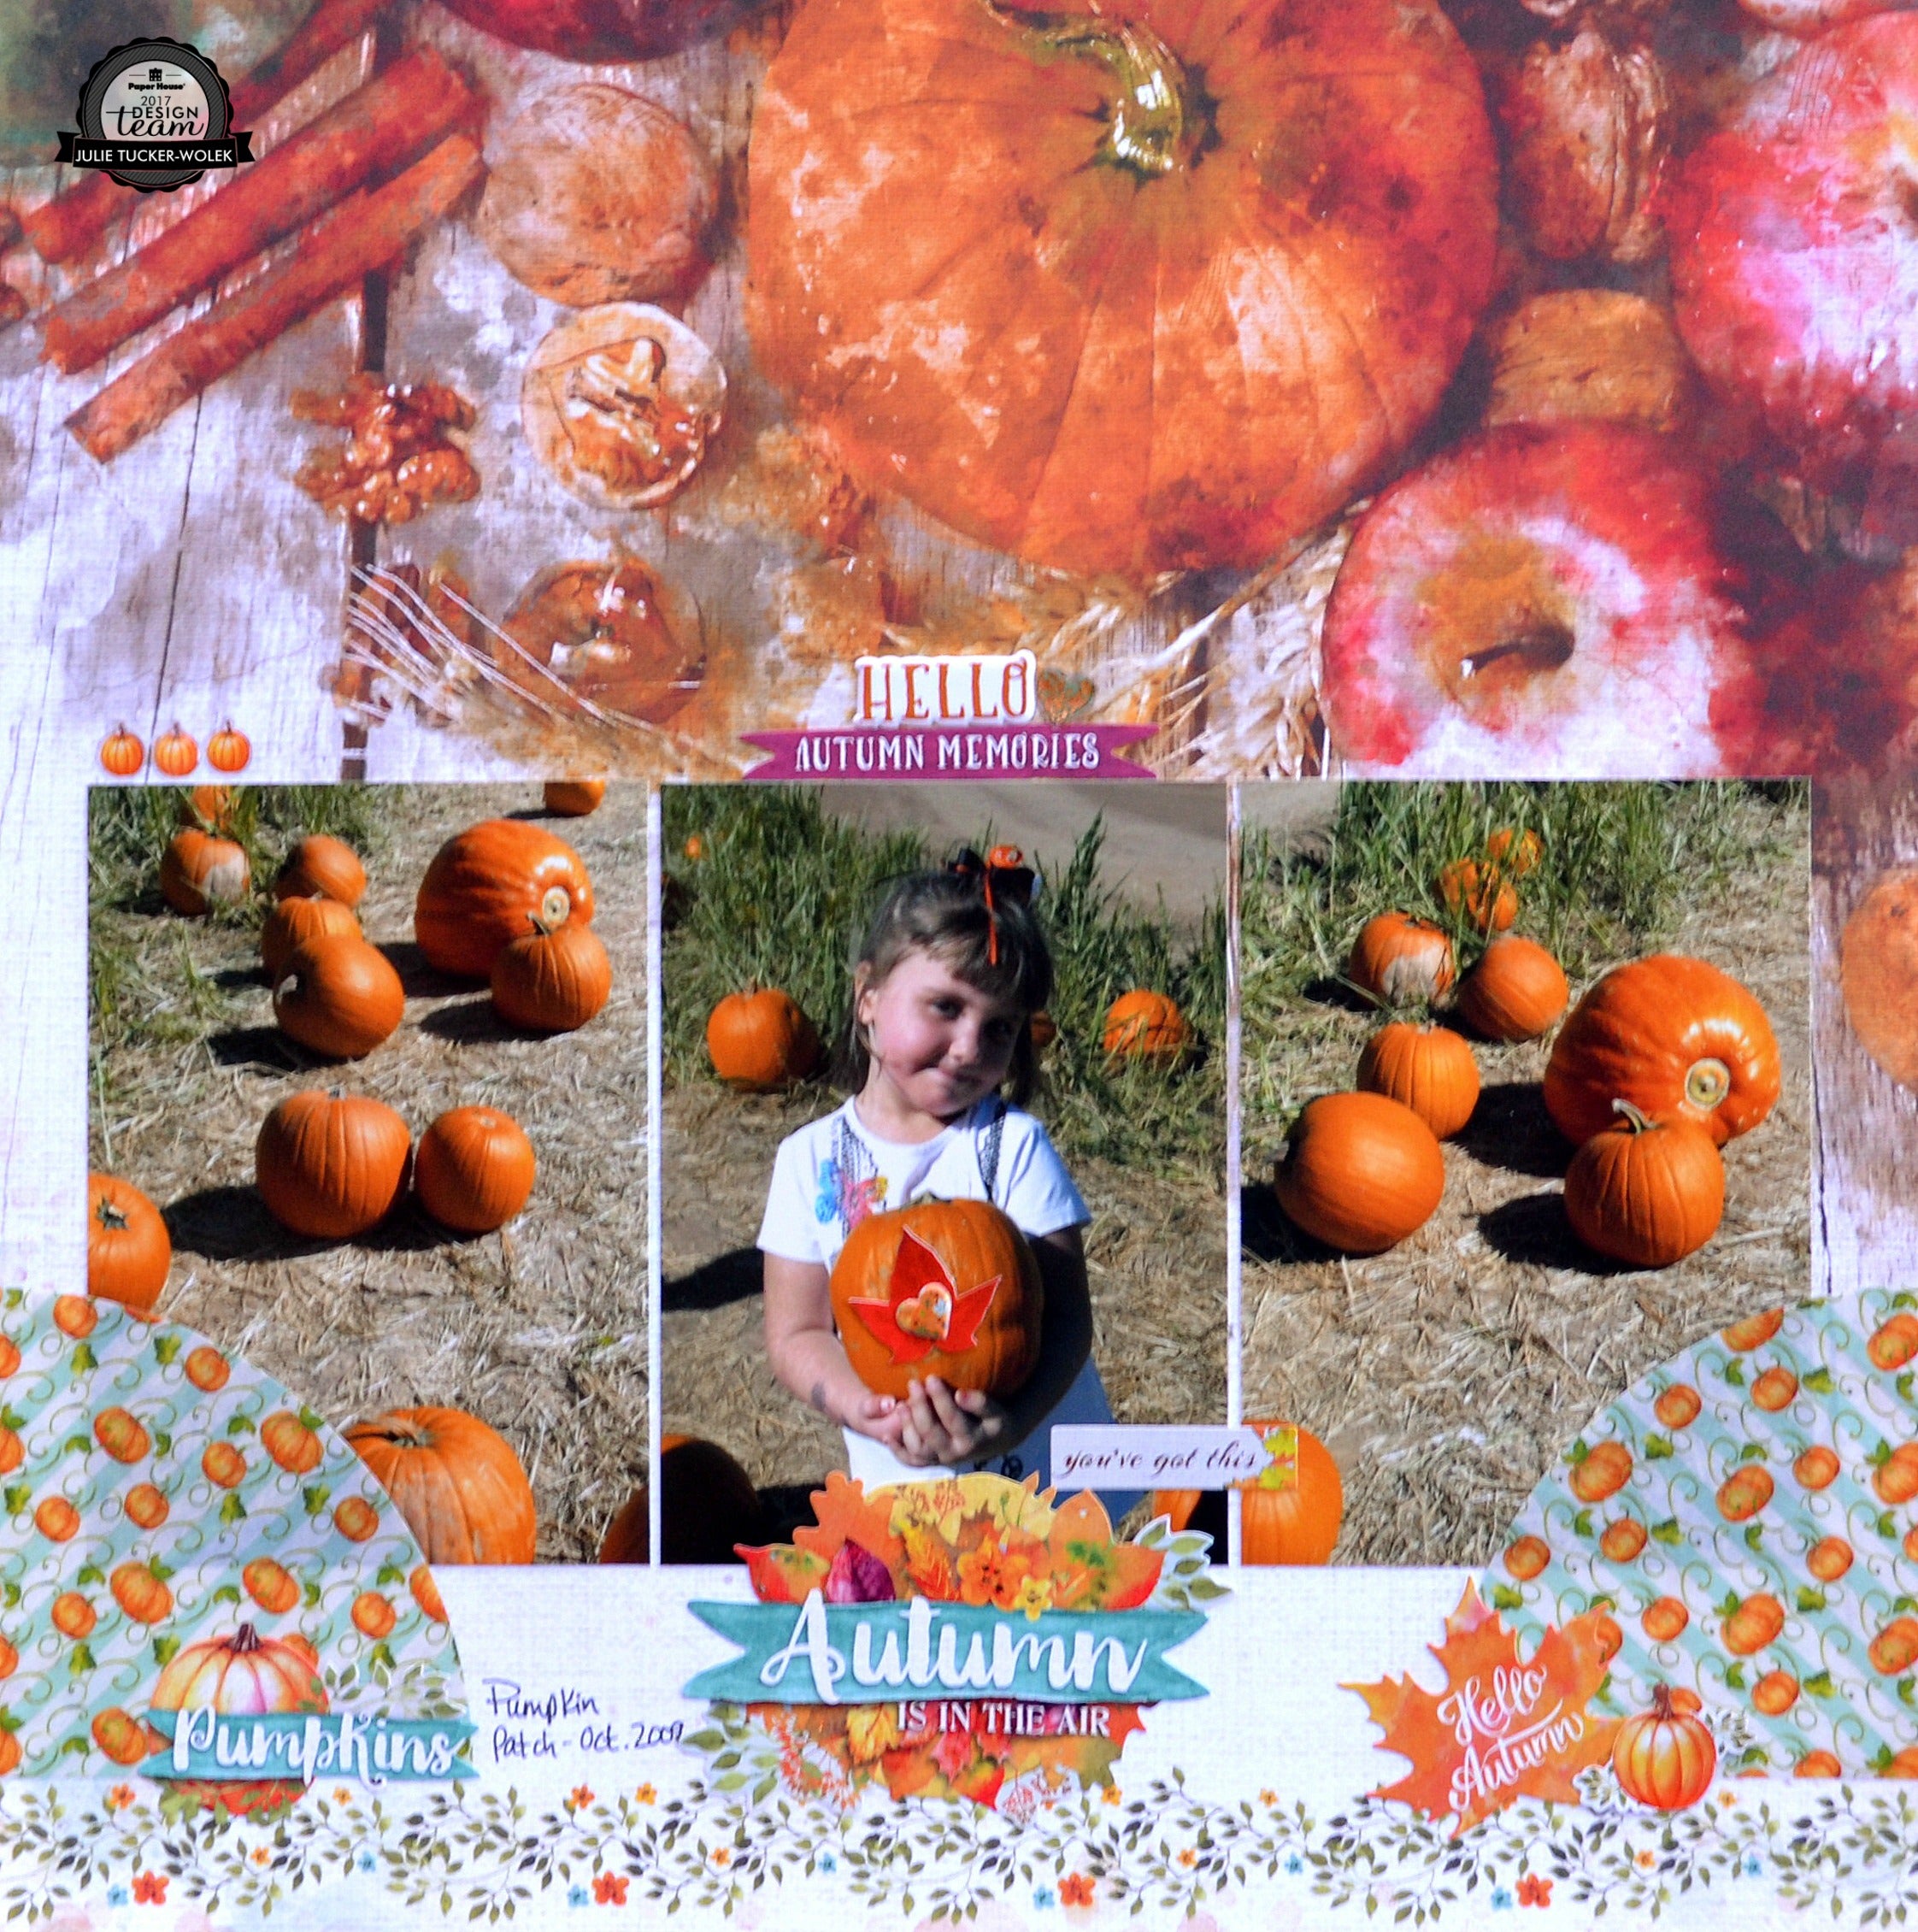 scrapbook layout featuring autumn pumpkins and photo of girl in pumpkin patch.